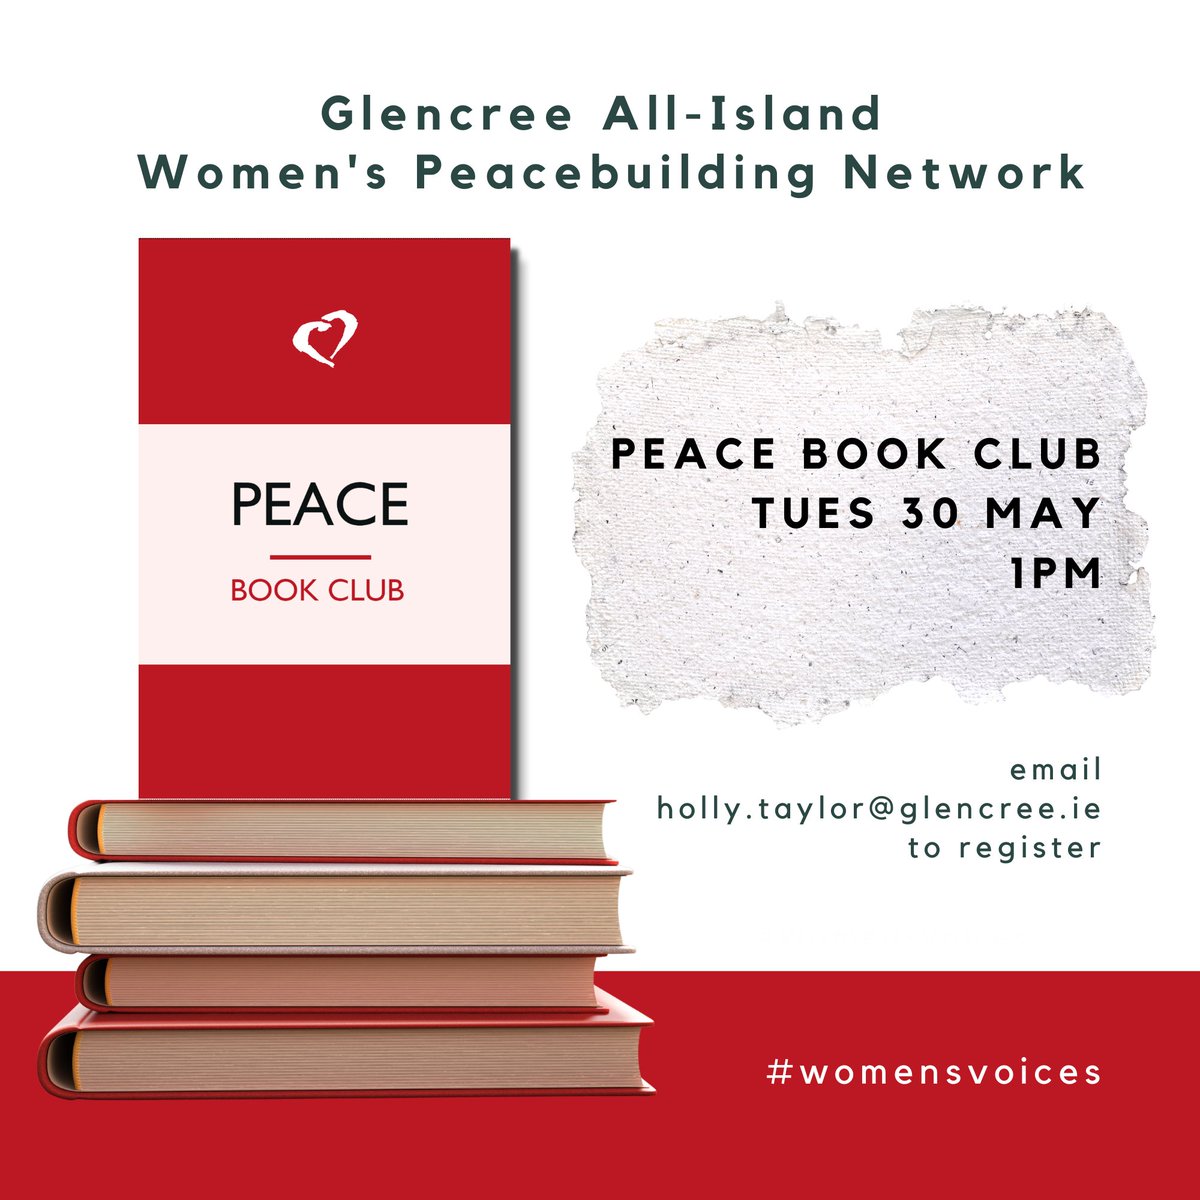 Our All-island Women's Peacebuilding Network & Women's Leadership Programme's Peace Book Club takes place online tomorrow Tues. 30th May @ 1pm. 📖🕊
For more information: glencree.ie/women/womenpea…
To register 👉 holly.taylor@glencree.ie 📚💜
#glencree4peace #womensvoices #books